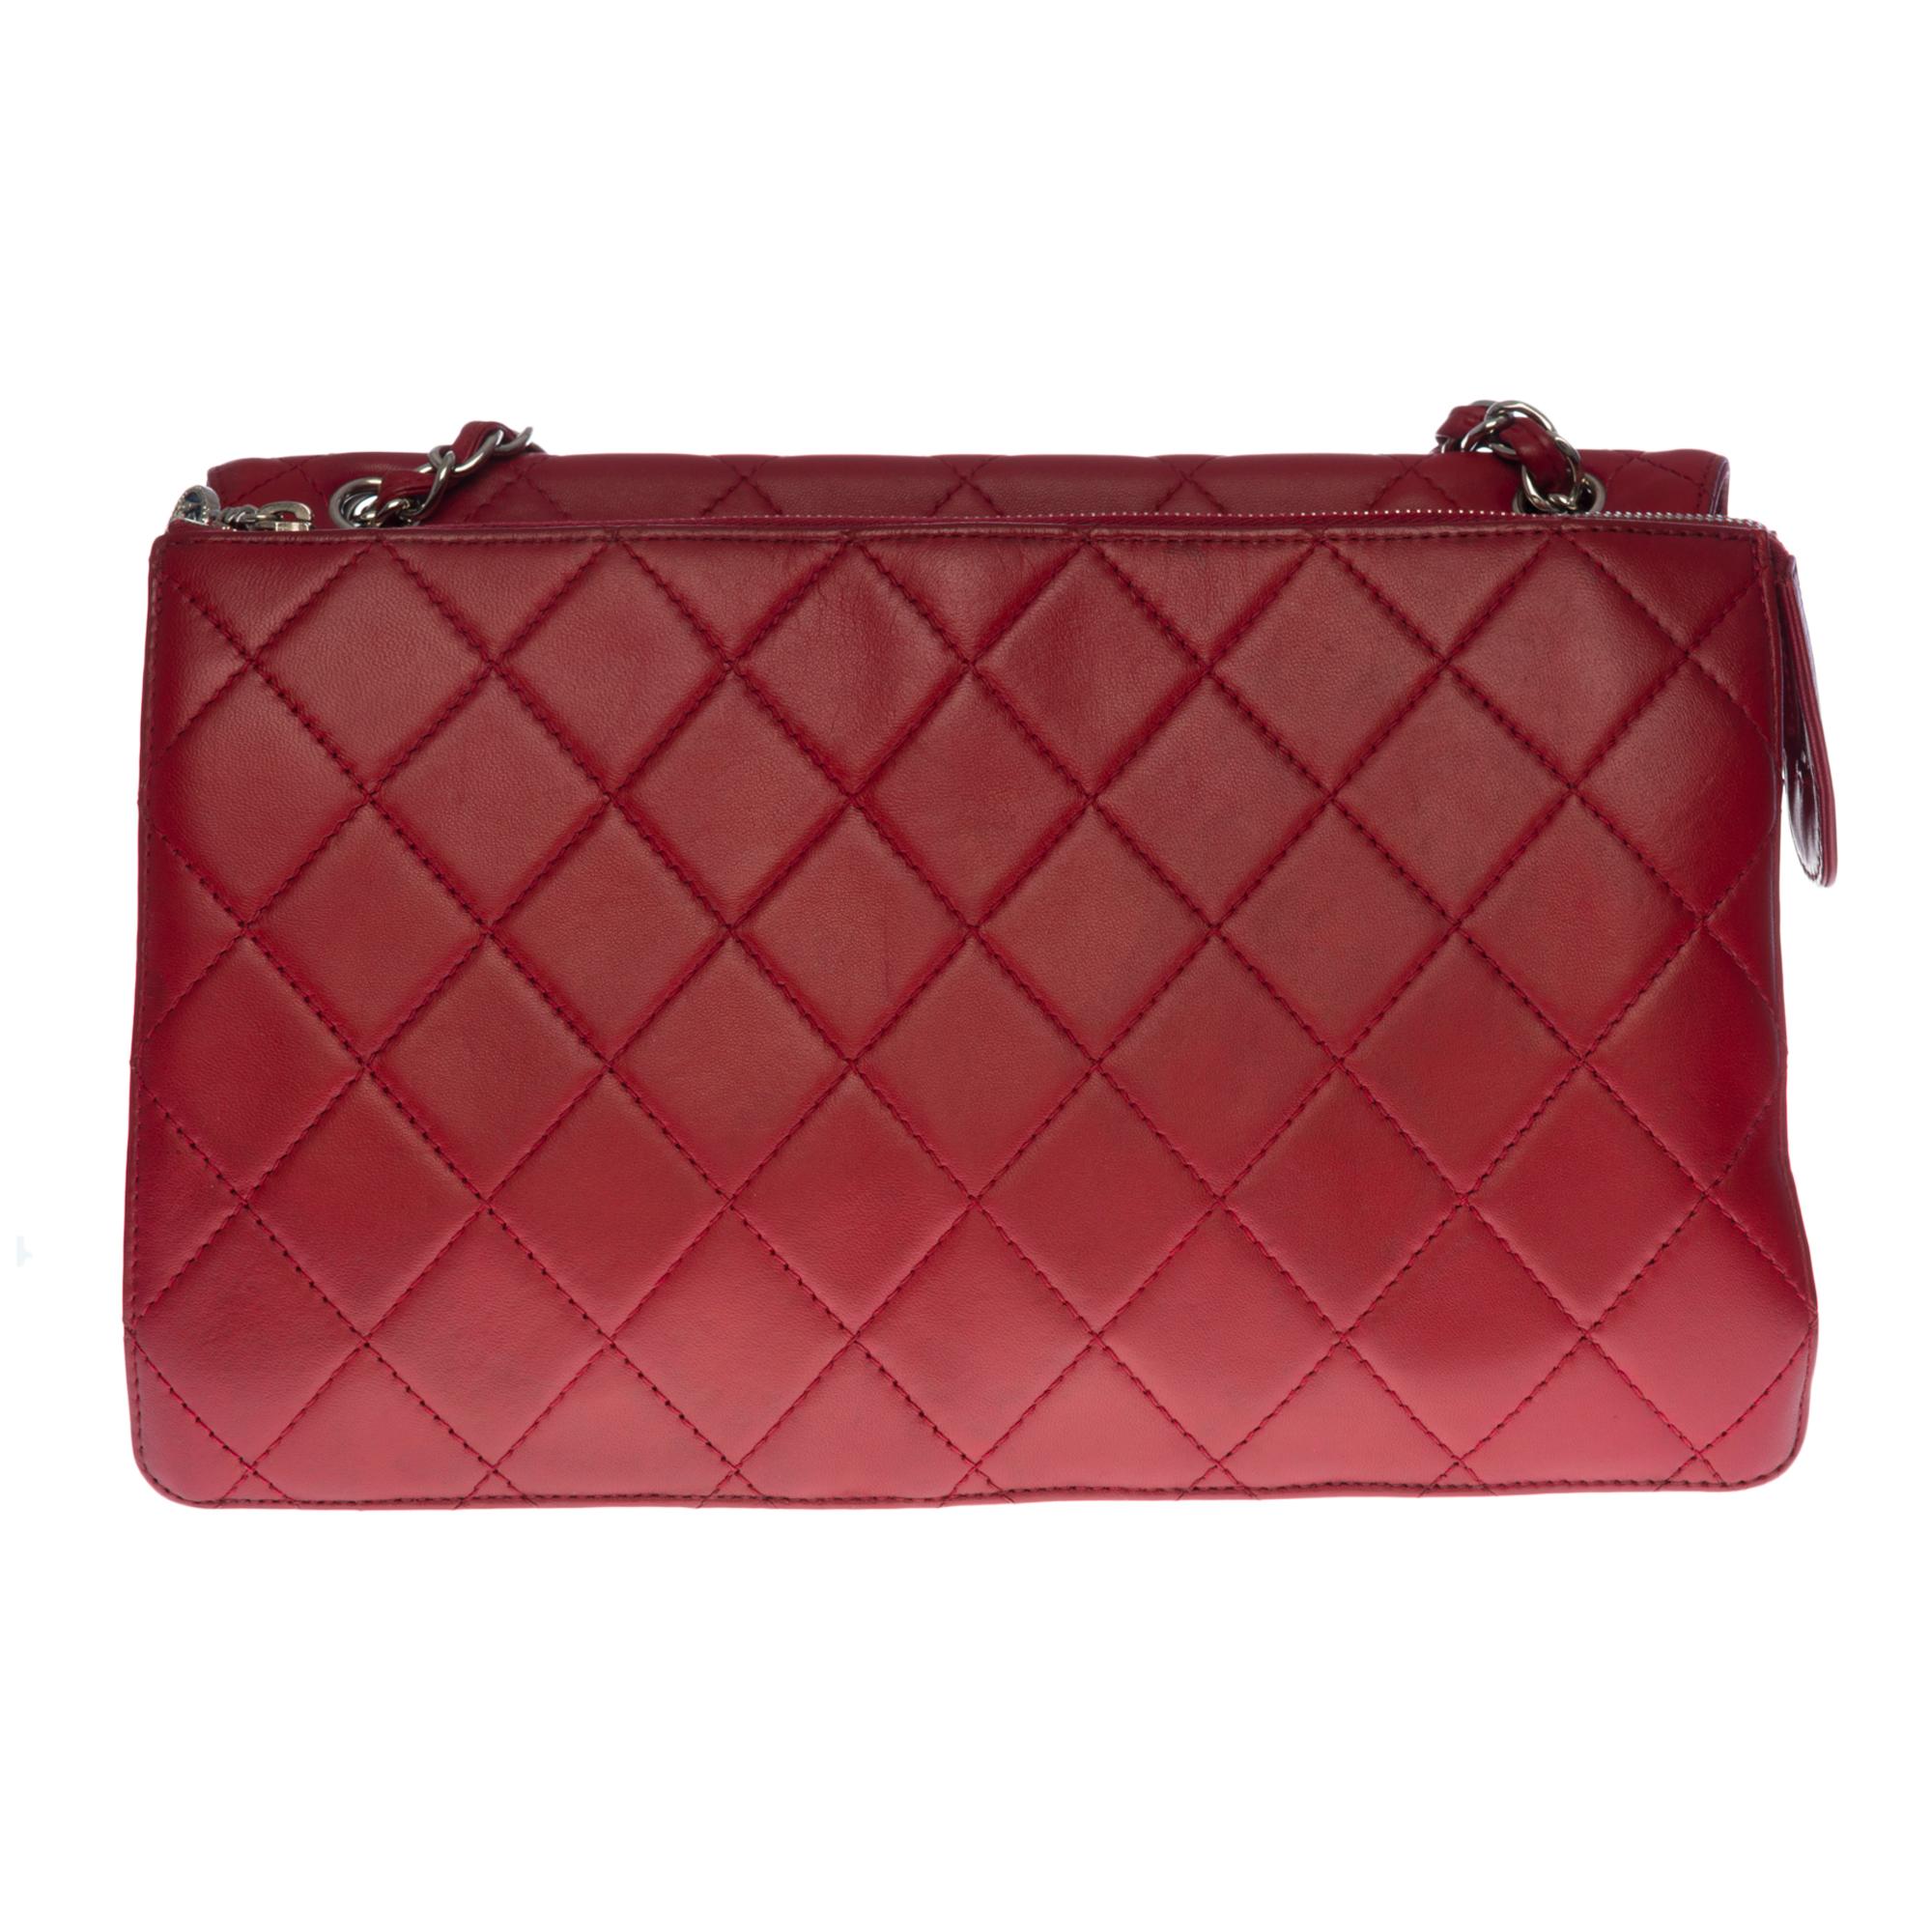 The very spacious Chanel 2.55 Maxi bag in red quilted leather, silver metal hardware, 1 silver metal chain handle intertwined with red leather for a hand, shoulder or shoulder strap
Red canvas interior
Flap closure with 2.55 swivel clasp in silver